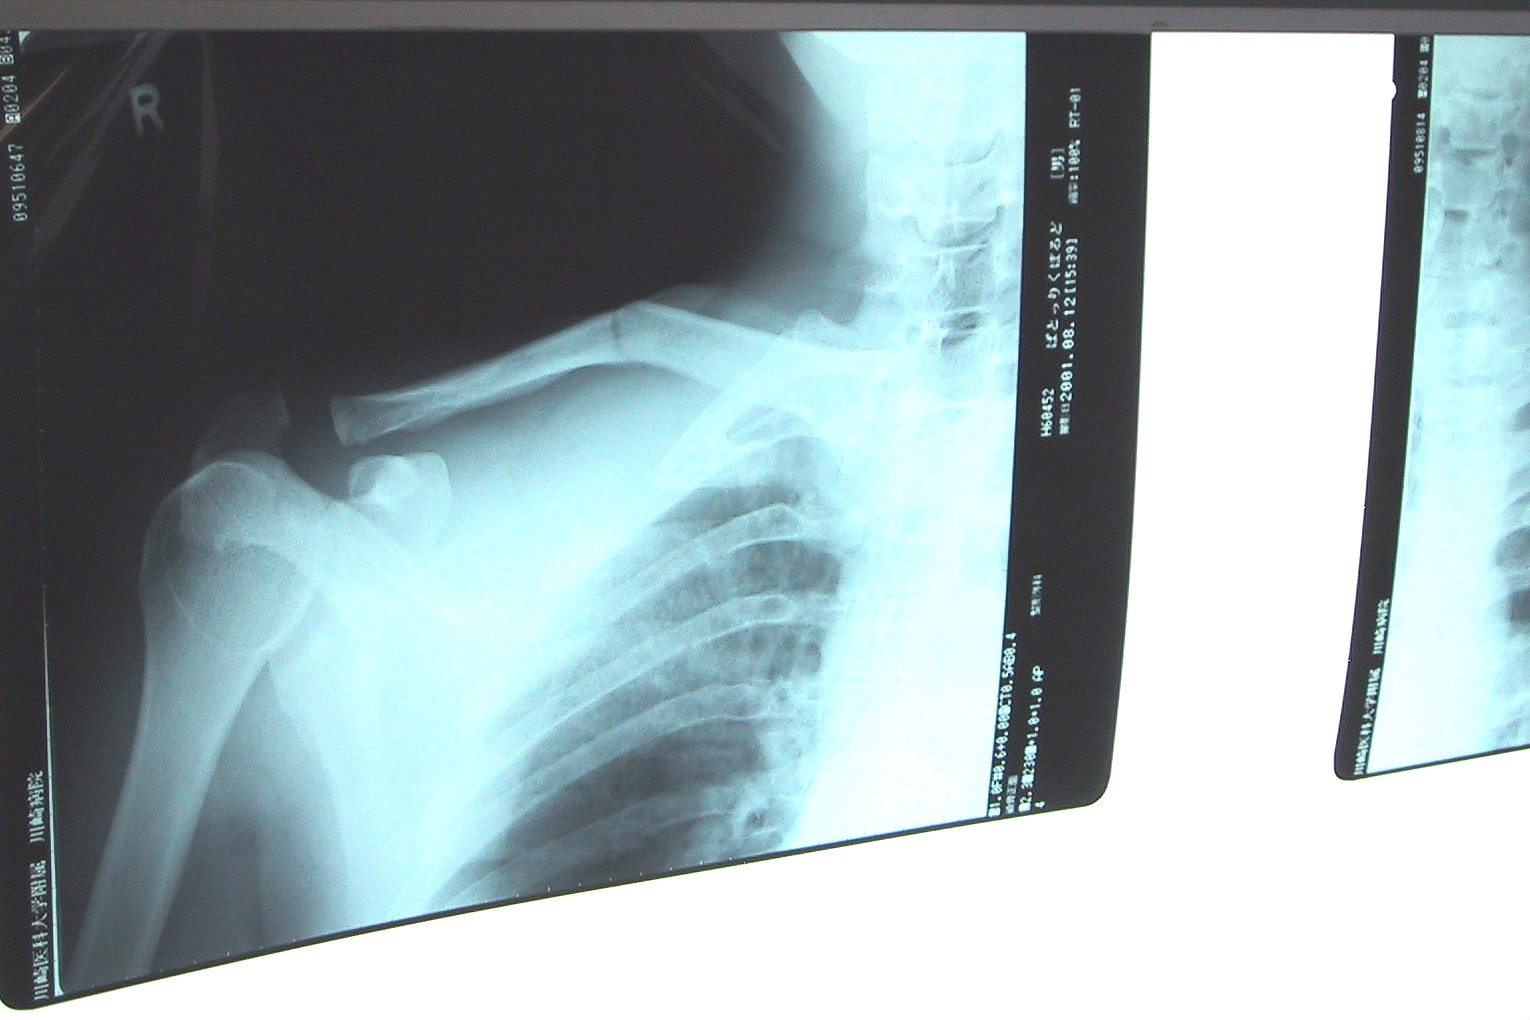 File:Clavicle fracture.jpg